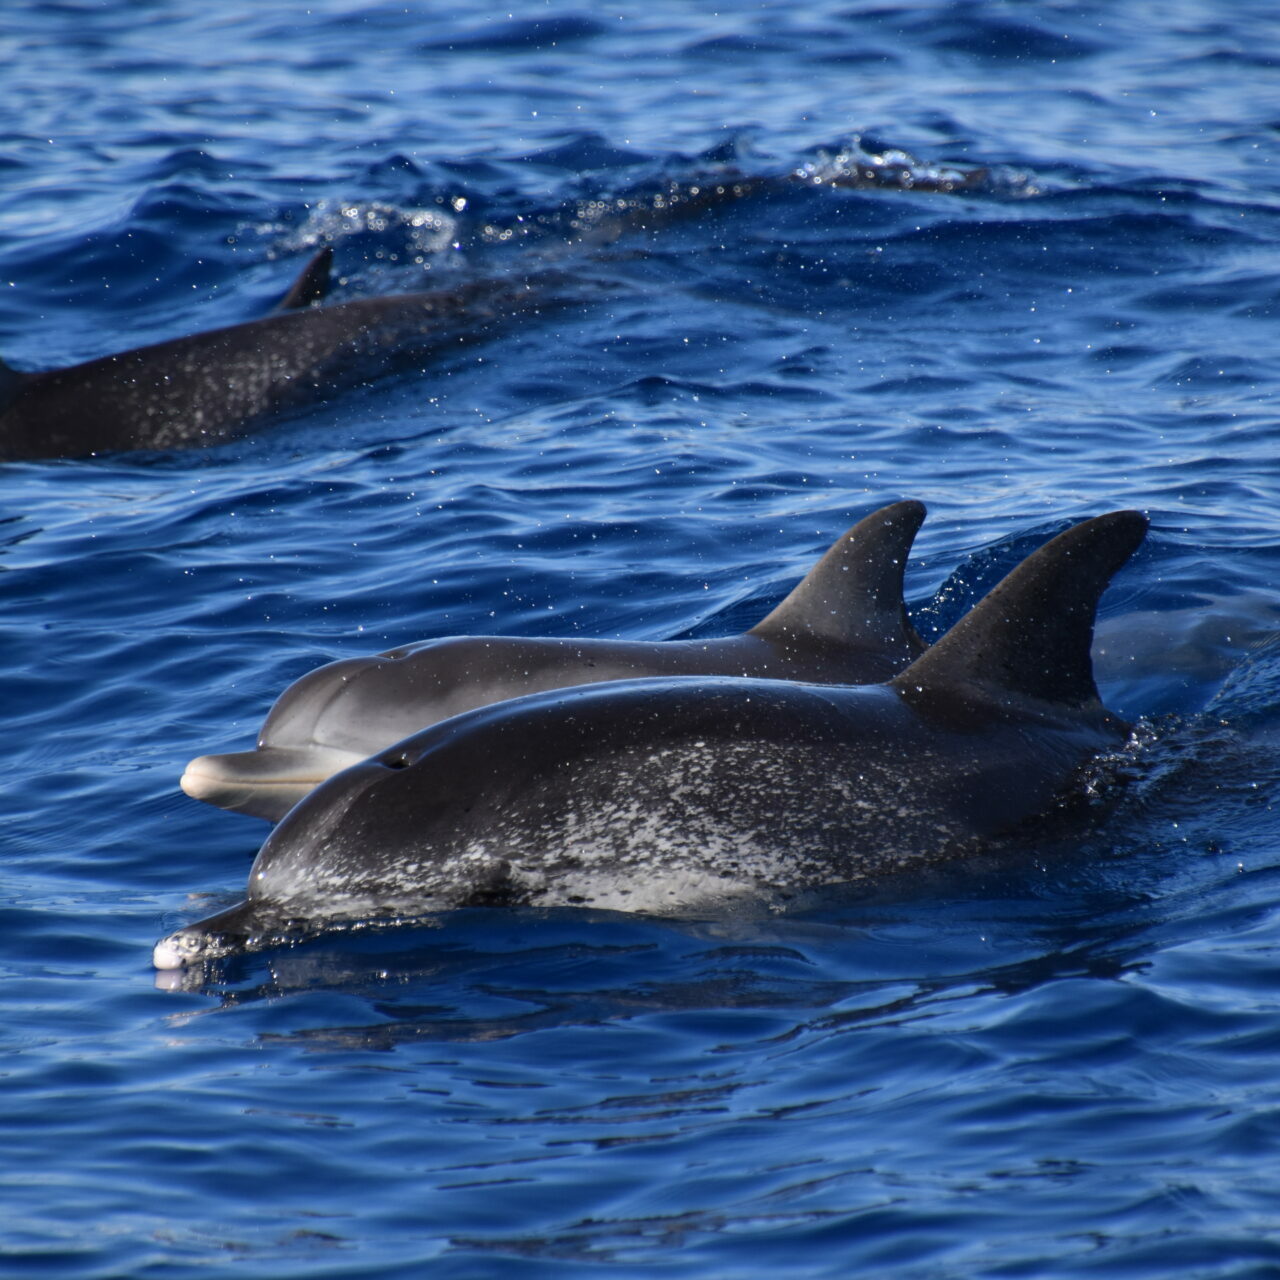 Spotted dolphins, Delfine, Wal- und Delfinbeobachtung